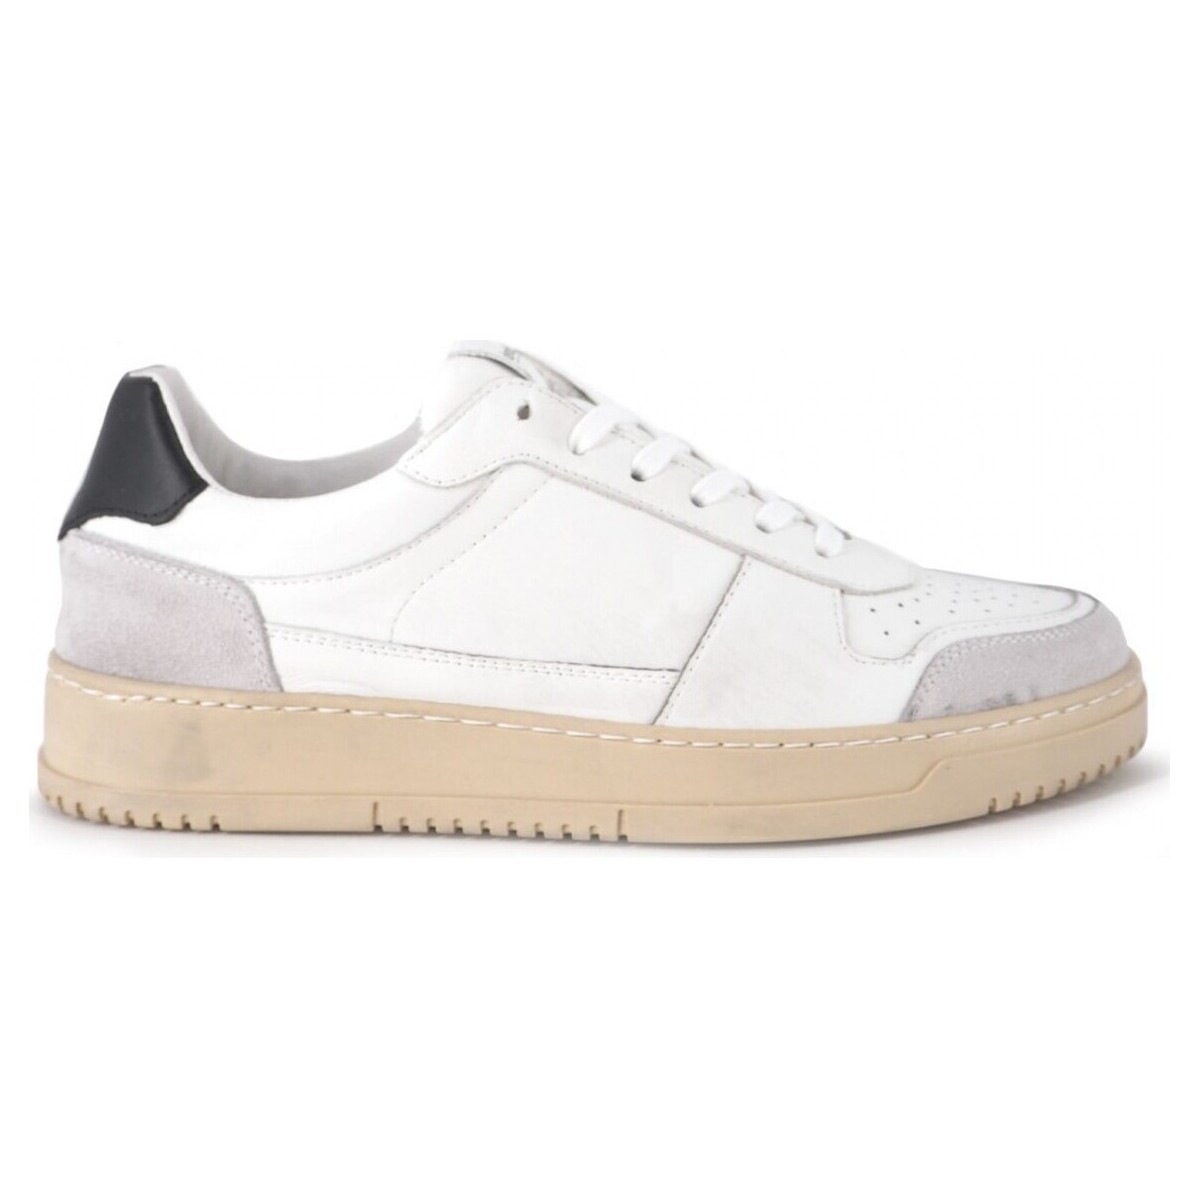 Chaussures Femme Add similar style Sneakers as Alessandra Ambrosio to your wardrobe with these picks below style Sneaker unisexe en nappa et daim Blanc